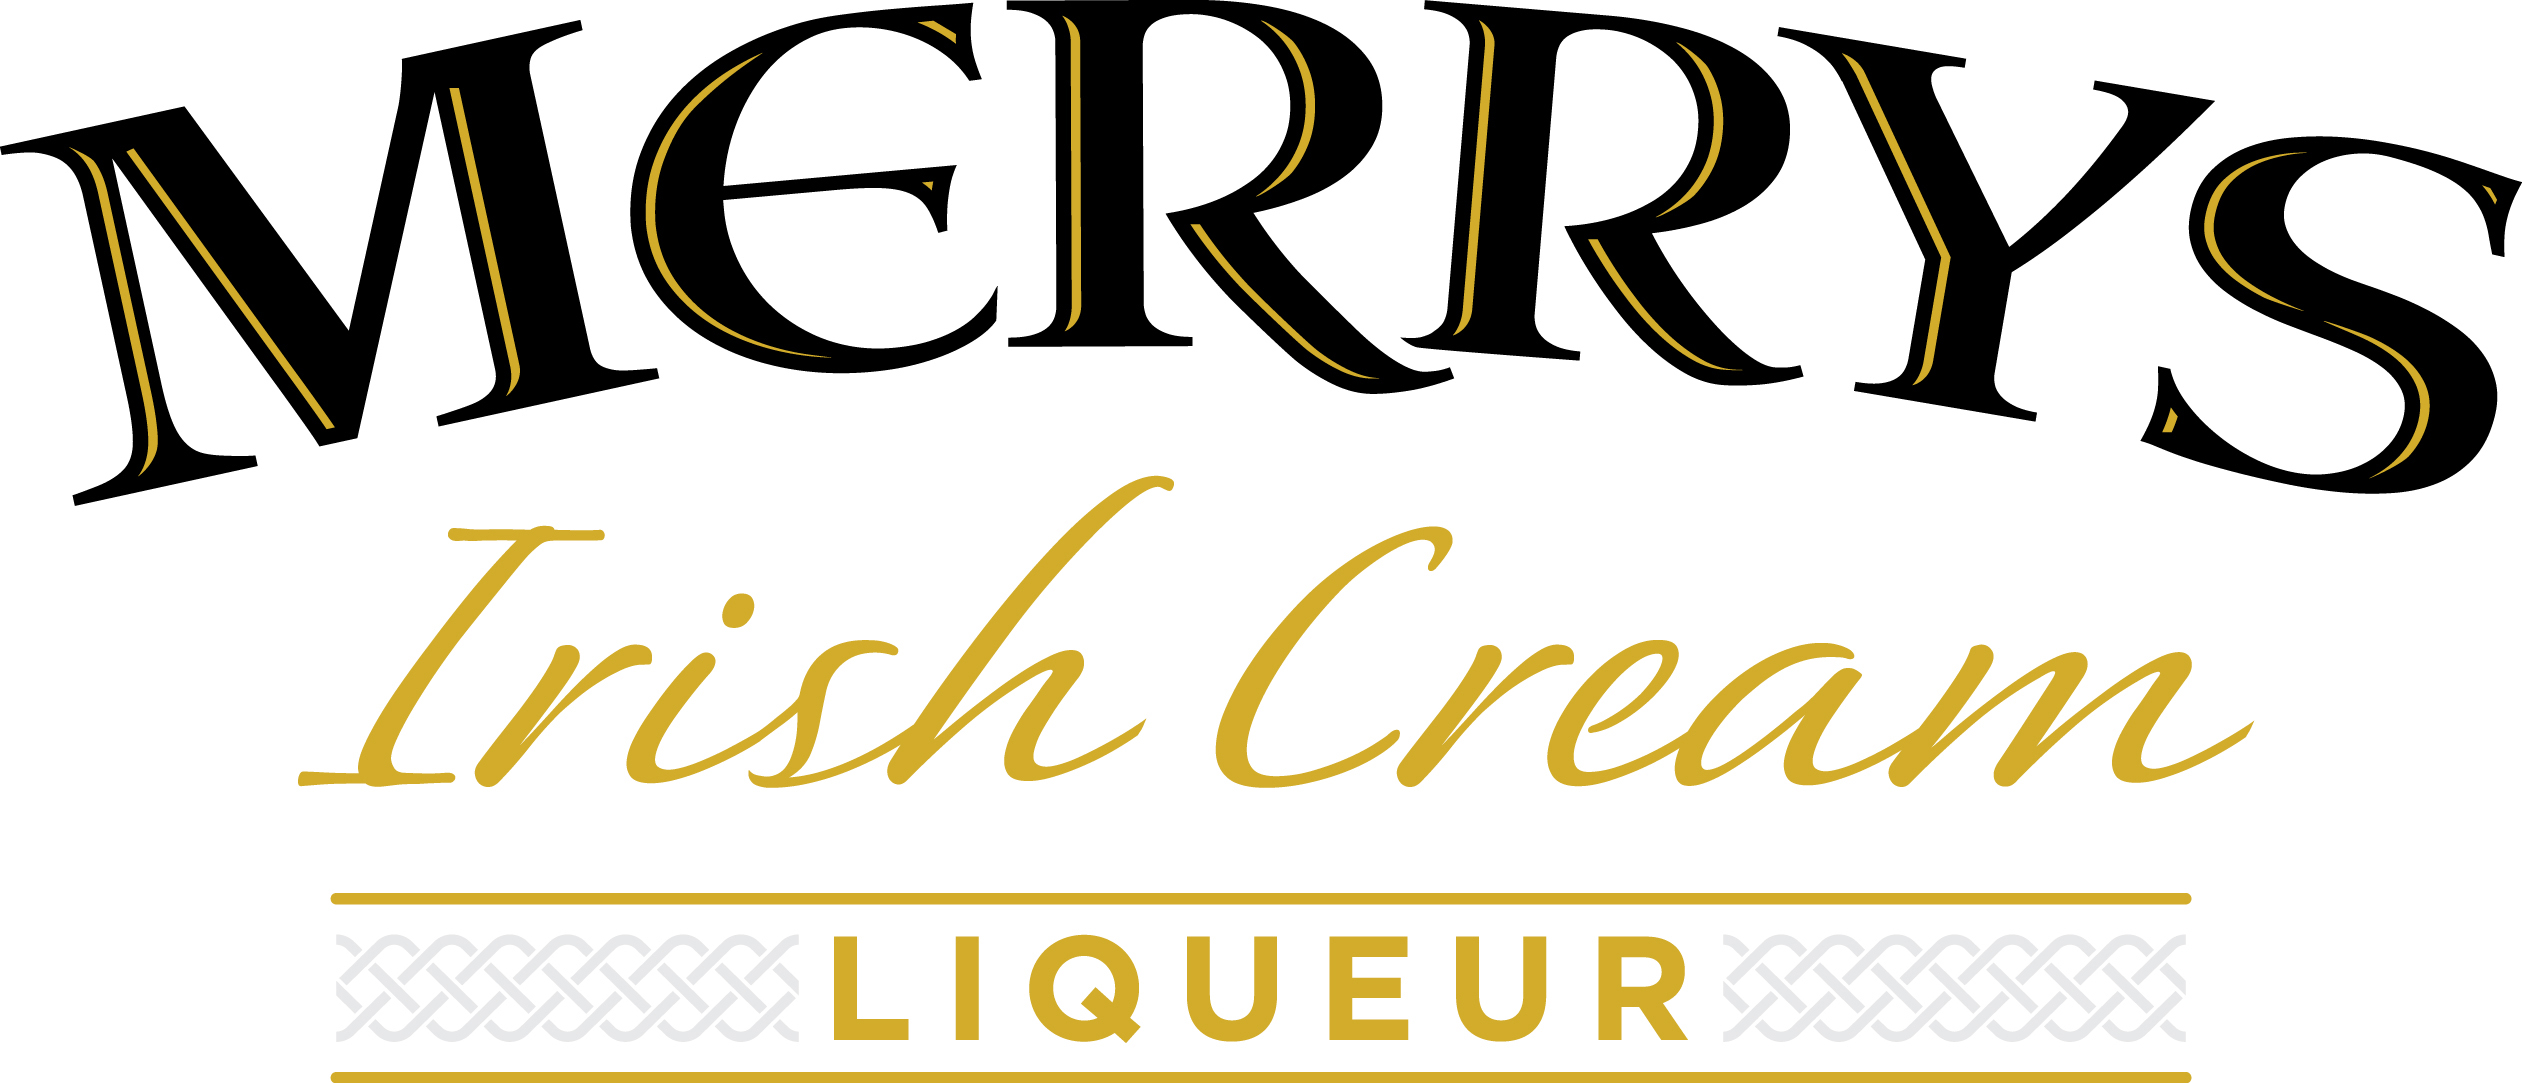 Robert A Merry & Co Limited logotype